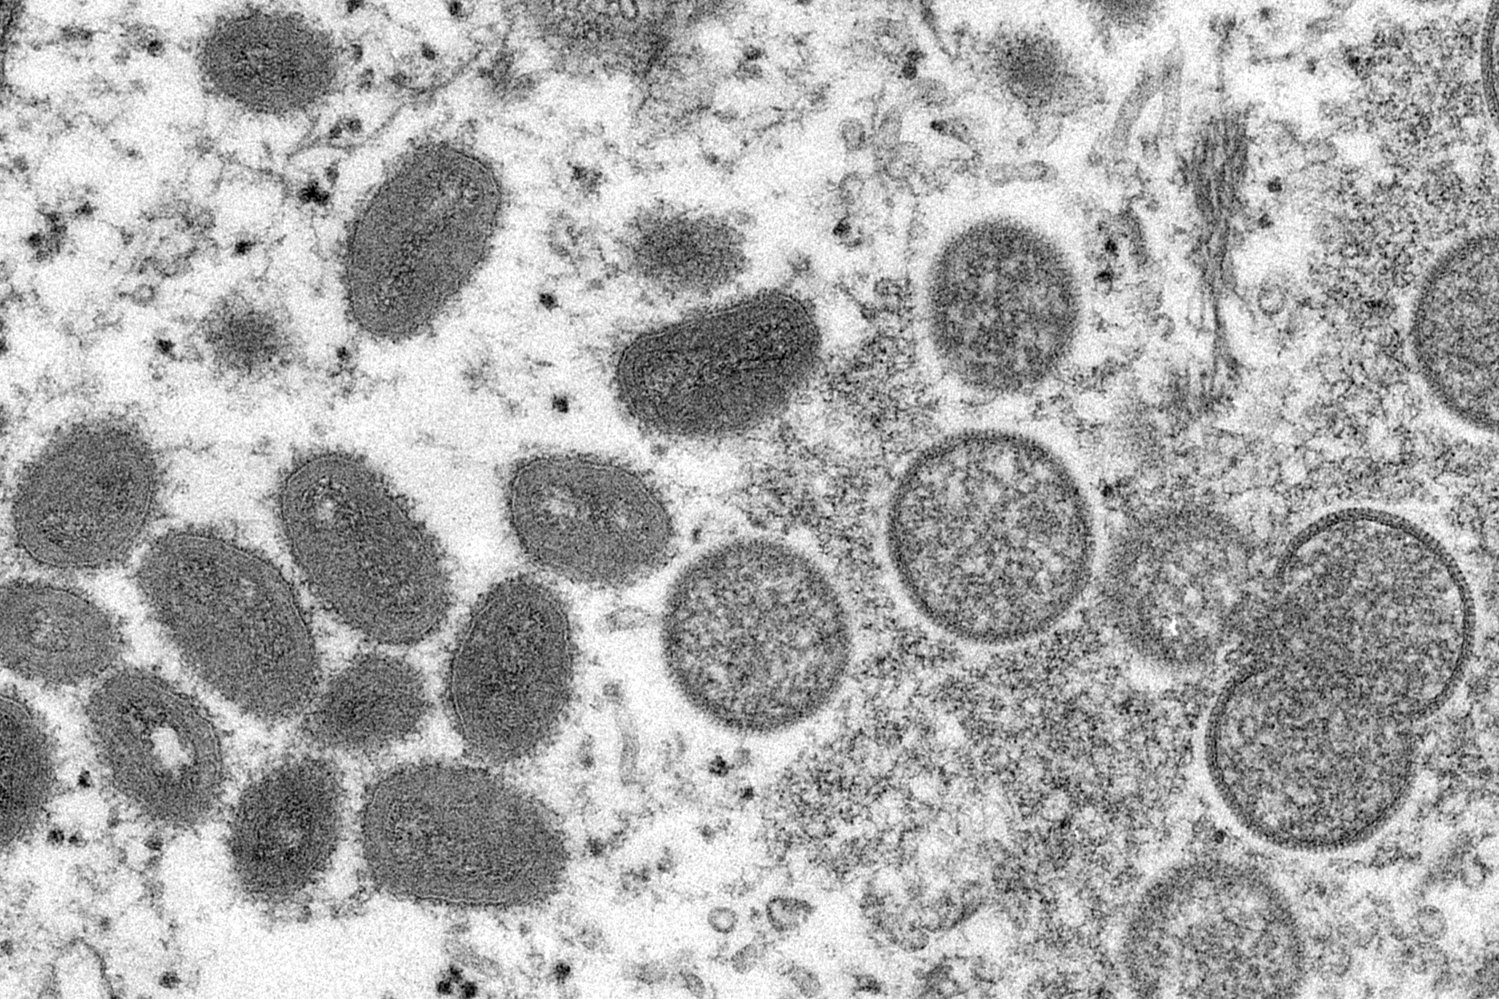 FILE - This 2003 electron microscope image made available by the Centers for Disease Control and Prevention shows mature, oval-shaped monkeypox virions, left, and spherical immature virions, right, obtained from a sample of human skin associated with the 2003 prairie dog outbreak. A leading doctor who chairs a World Health Organization expert group described the unprecedented outbreak of the rare disease monkeypox in developed countries as "a random event" that might be explained by risky sexual behavior at two recent mass events in Europe.